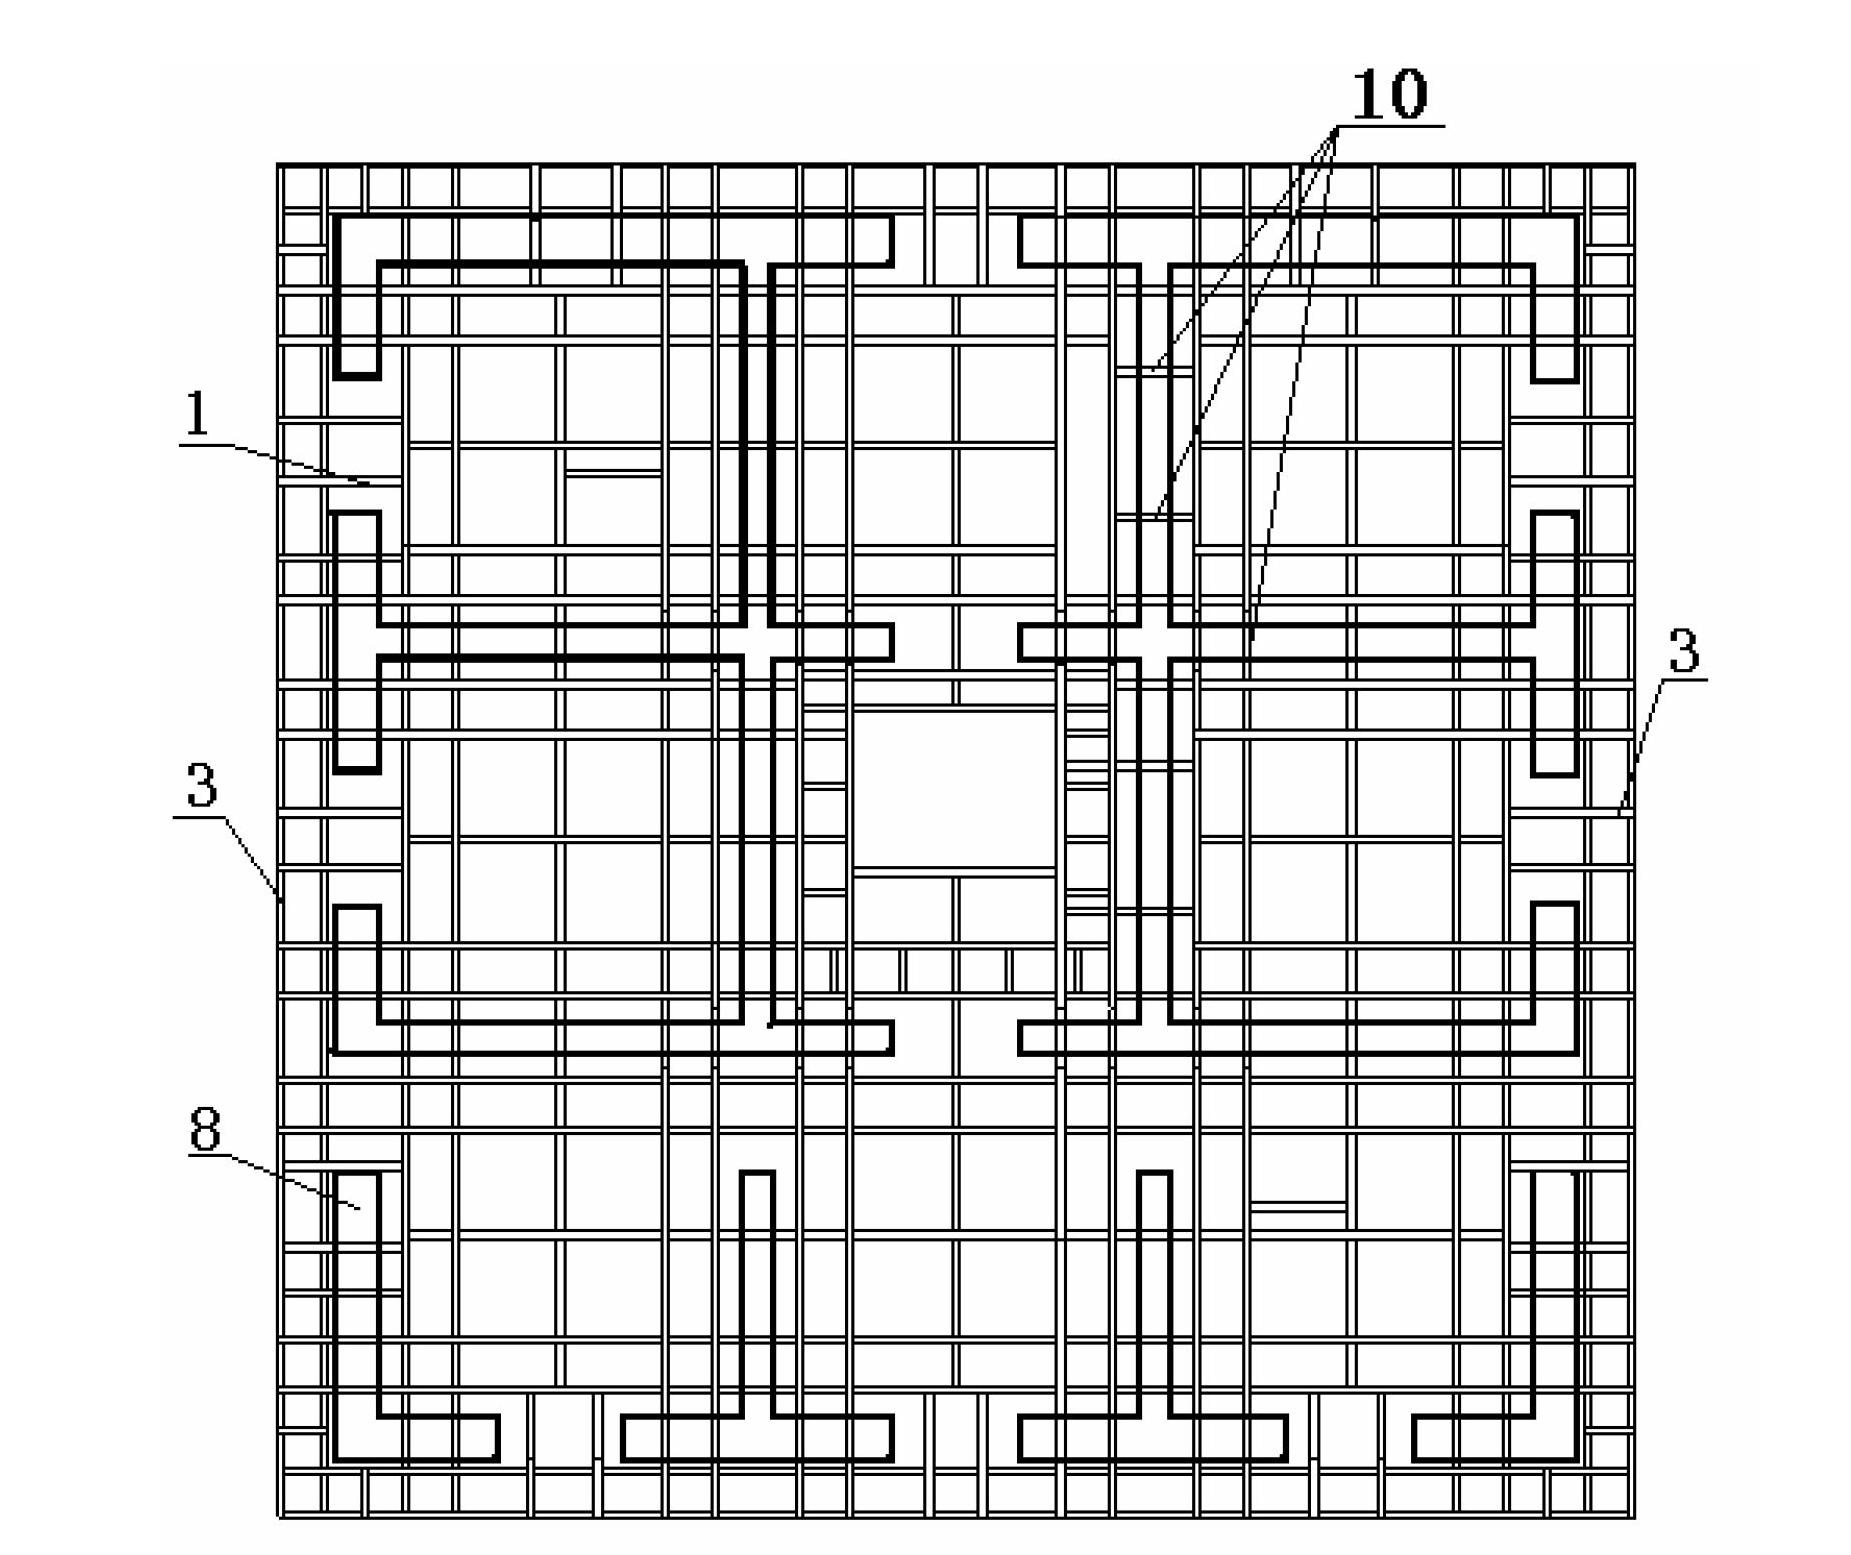 Drum frame supporting power built-in integrated jacking steel platform formwork system and construction method